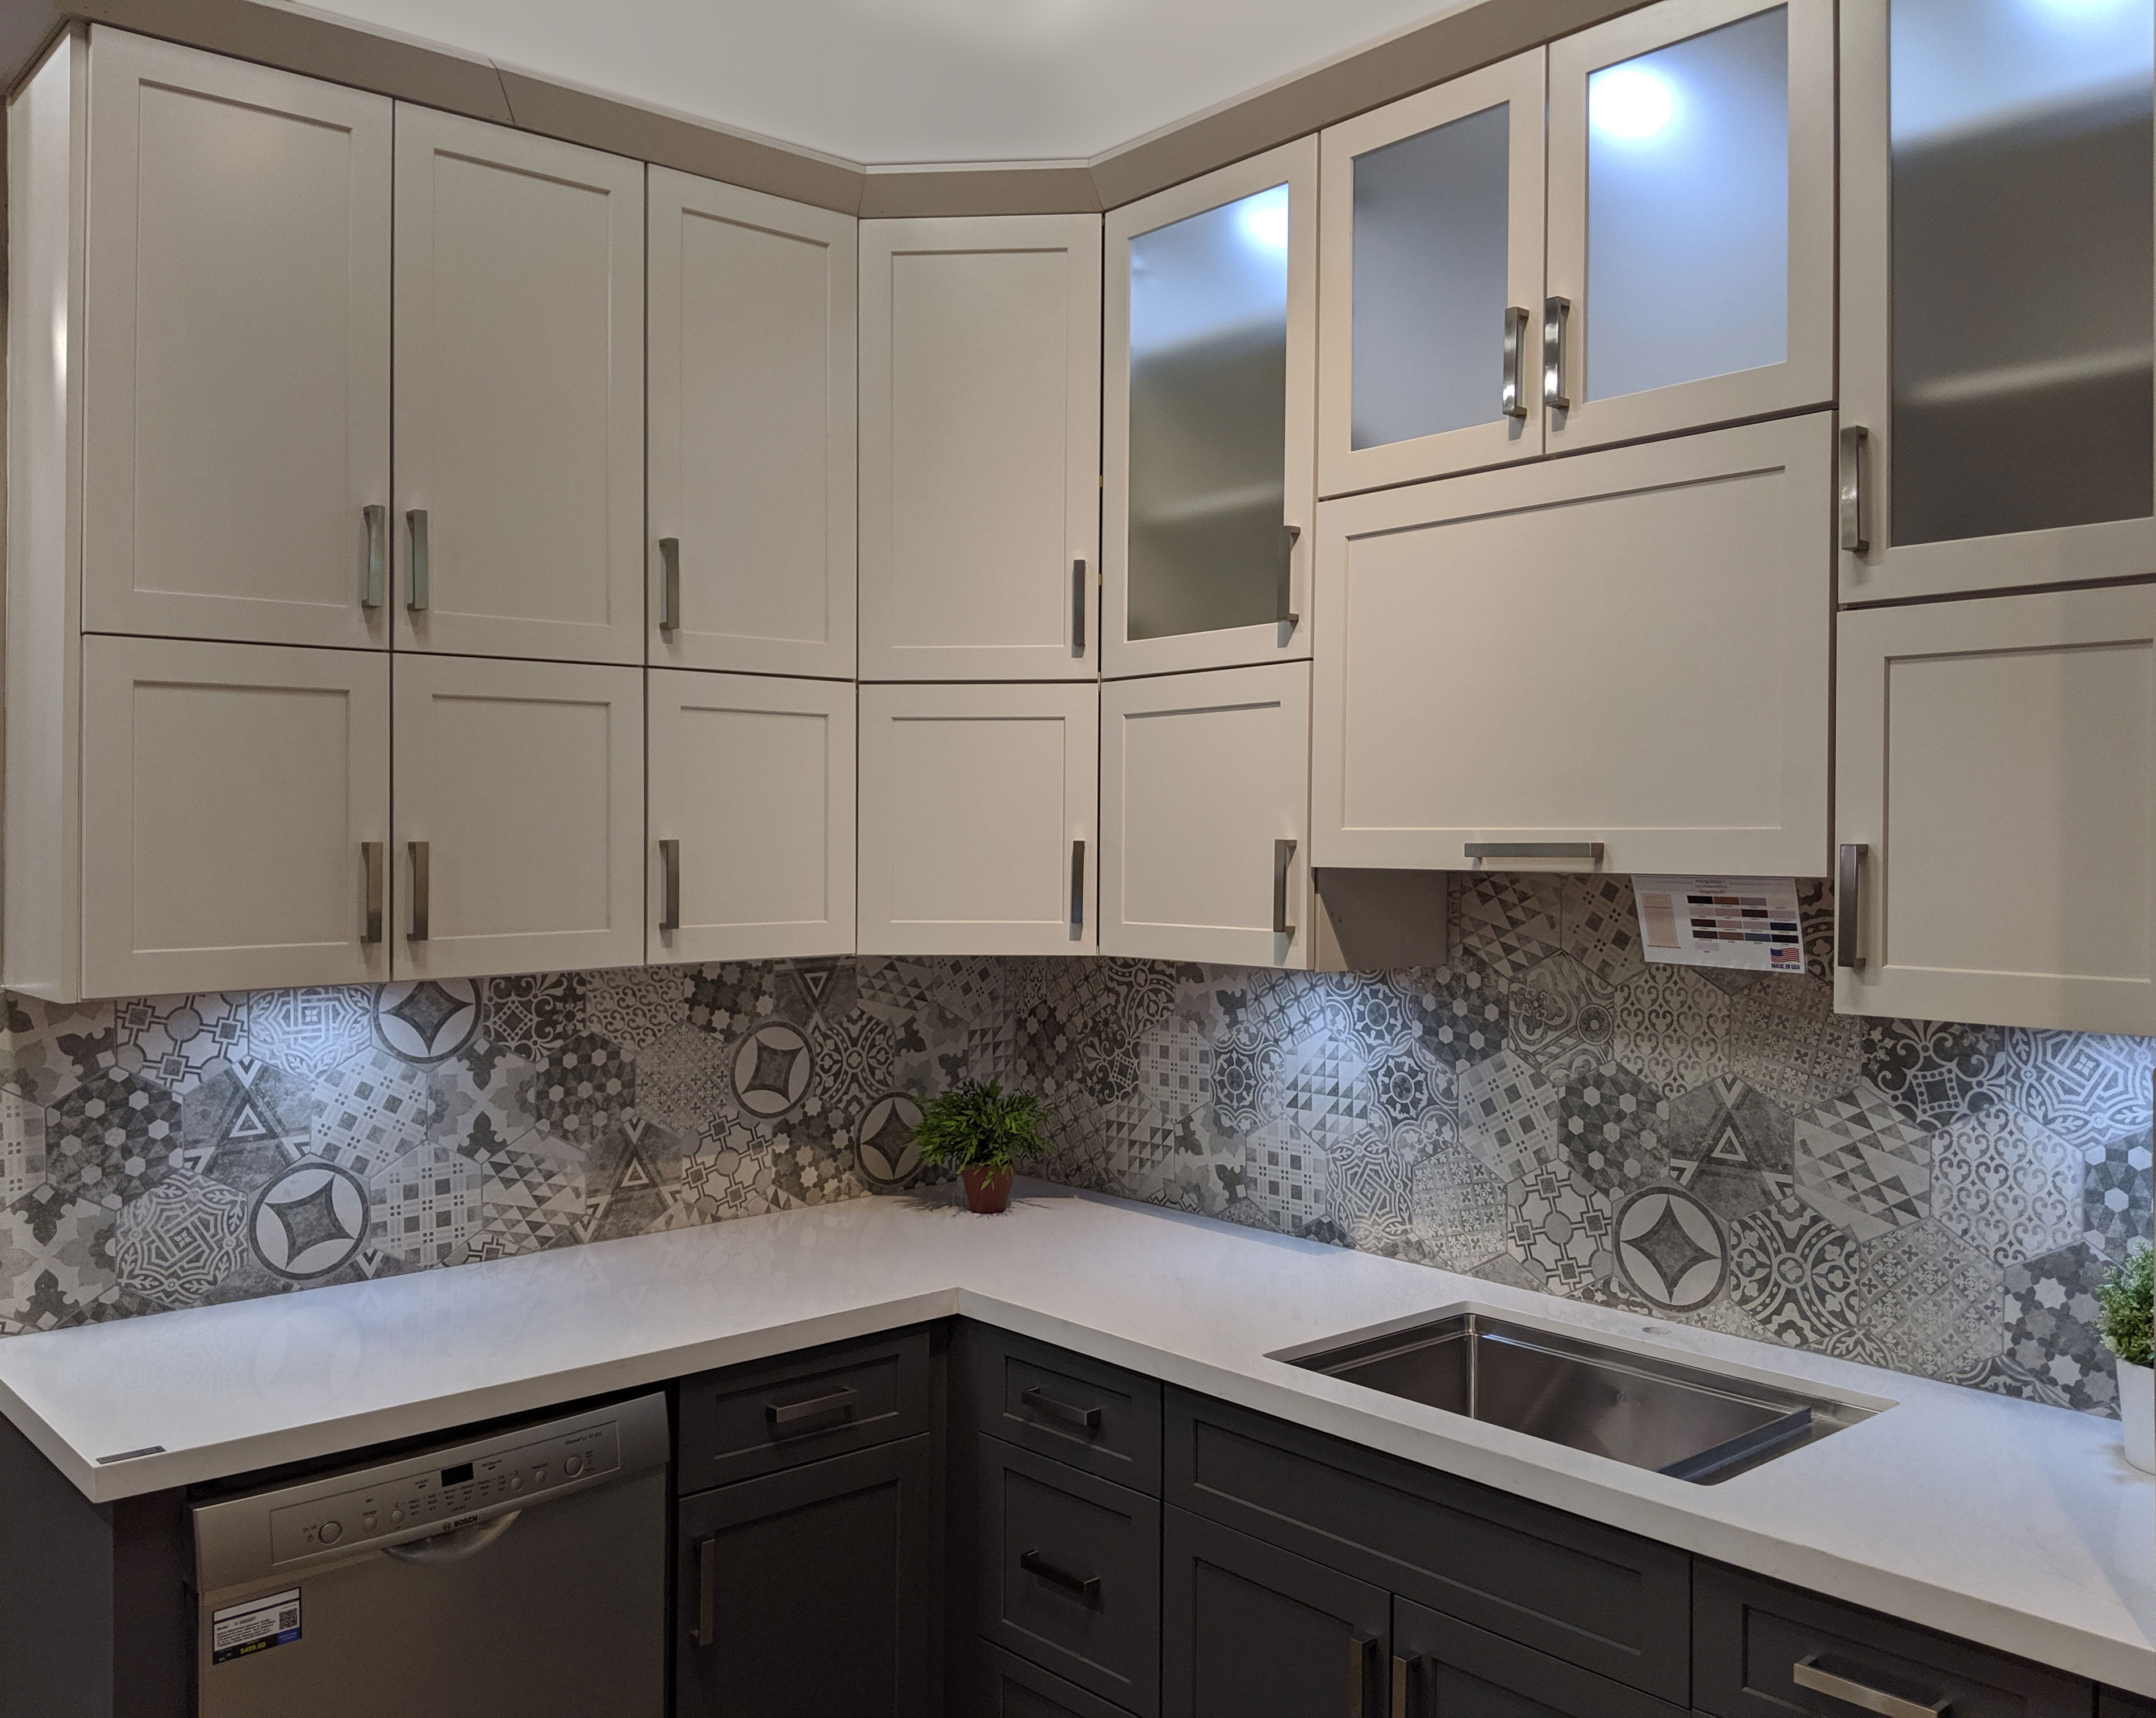 Discount Kitchen Cabinets In Stock Cabinets Oakland Bay Area